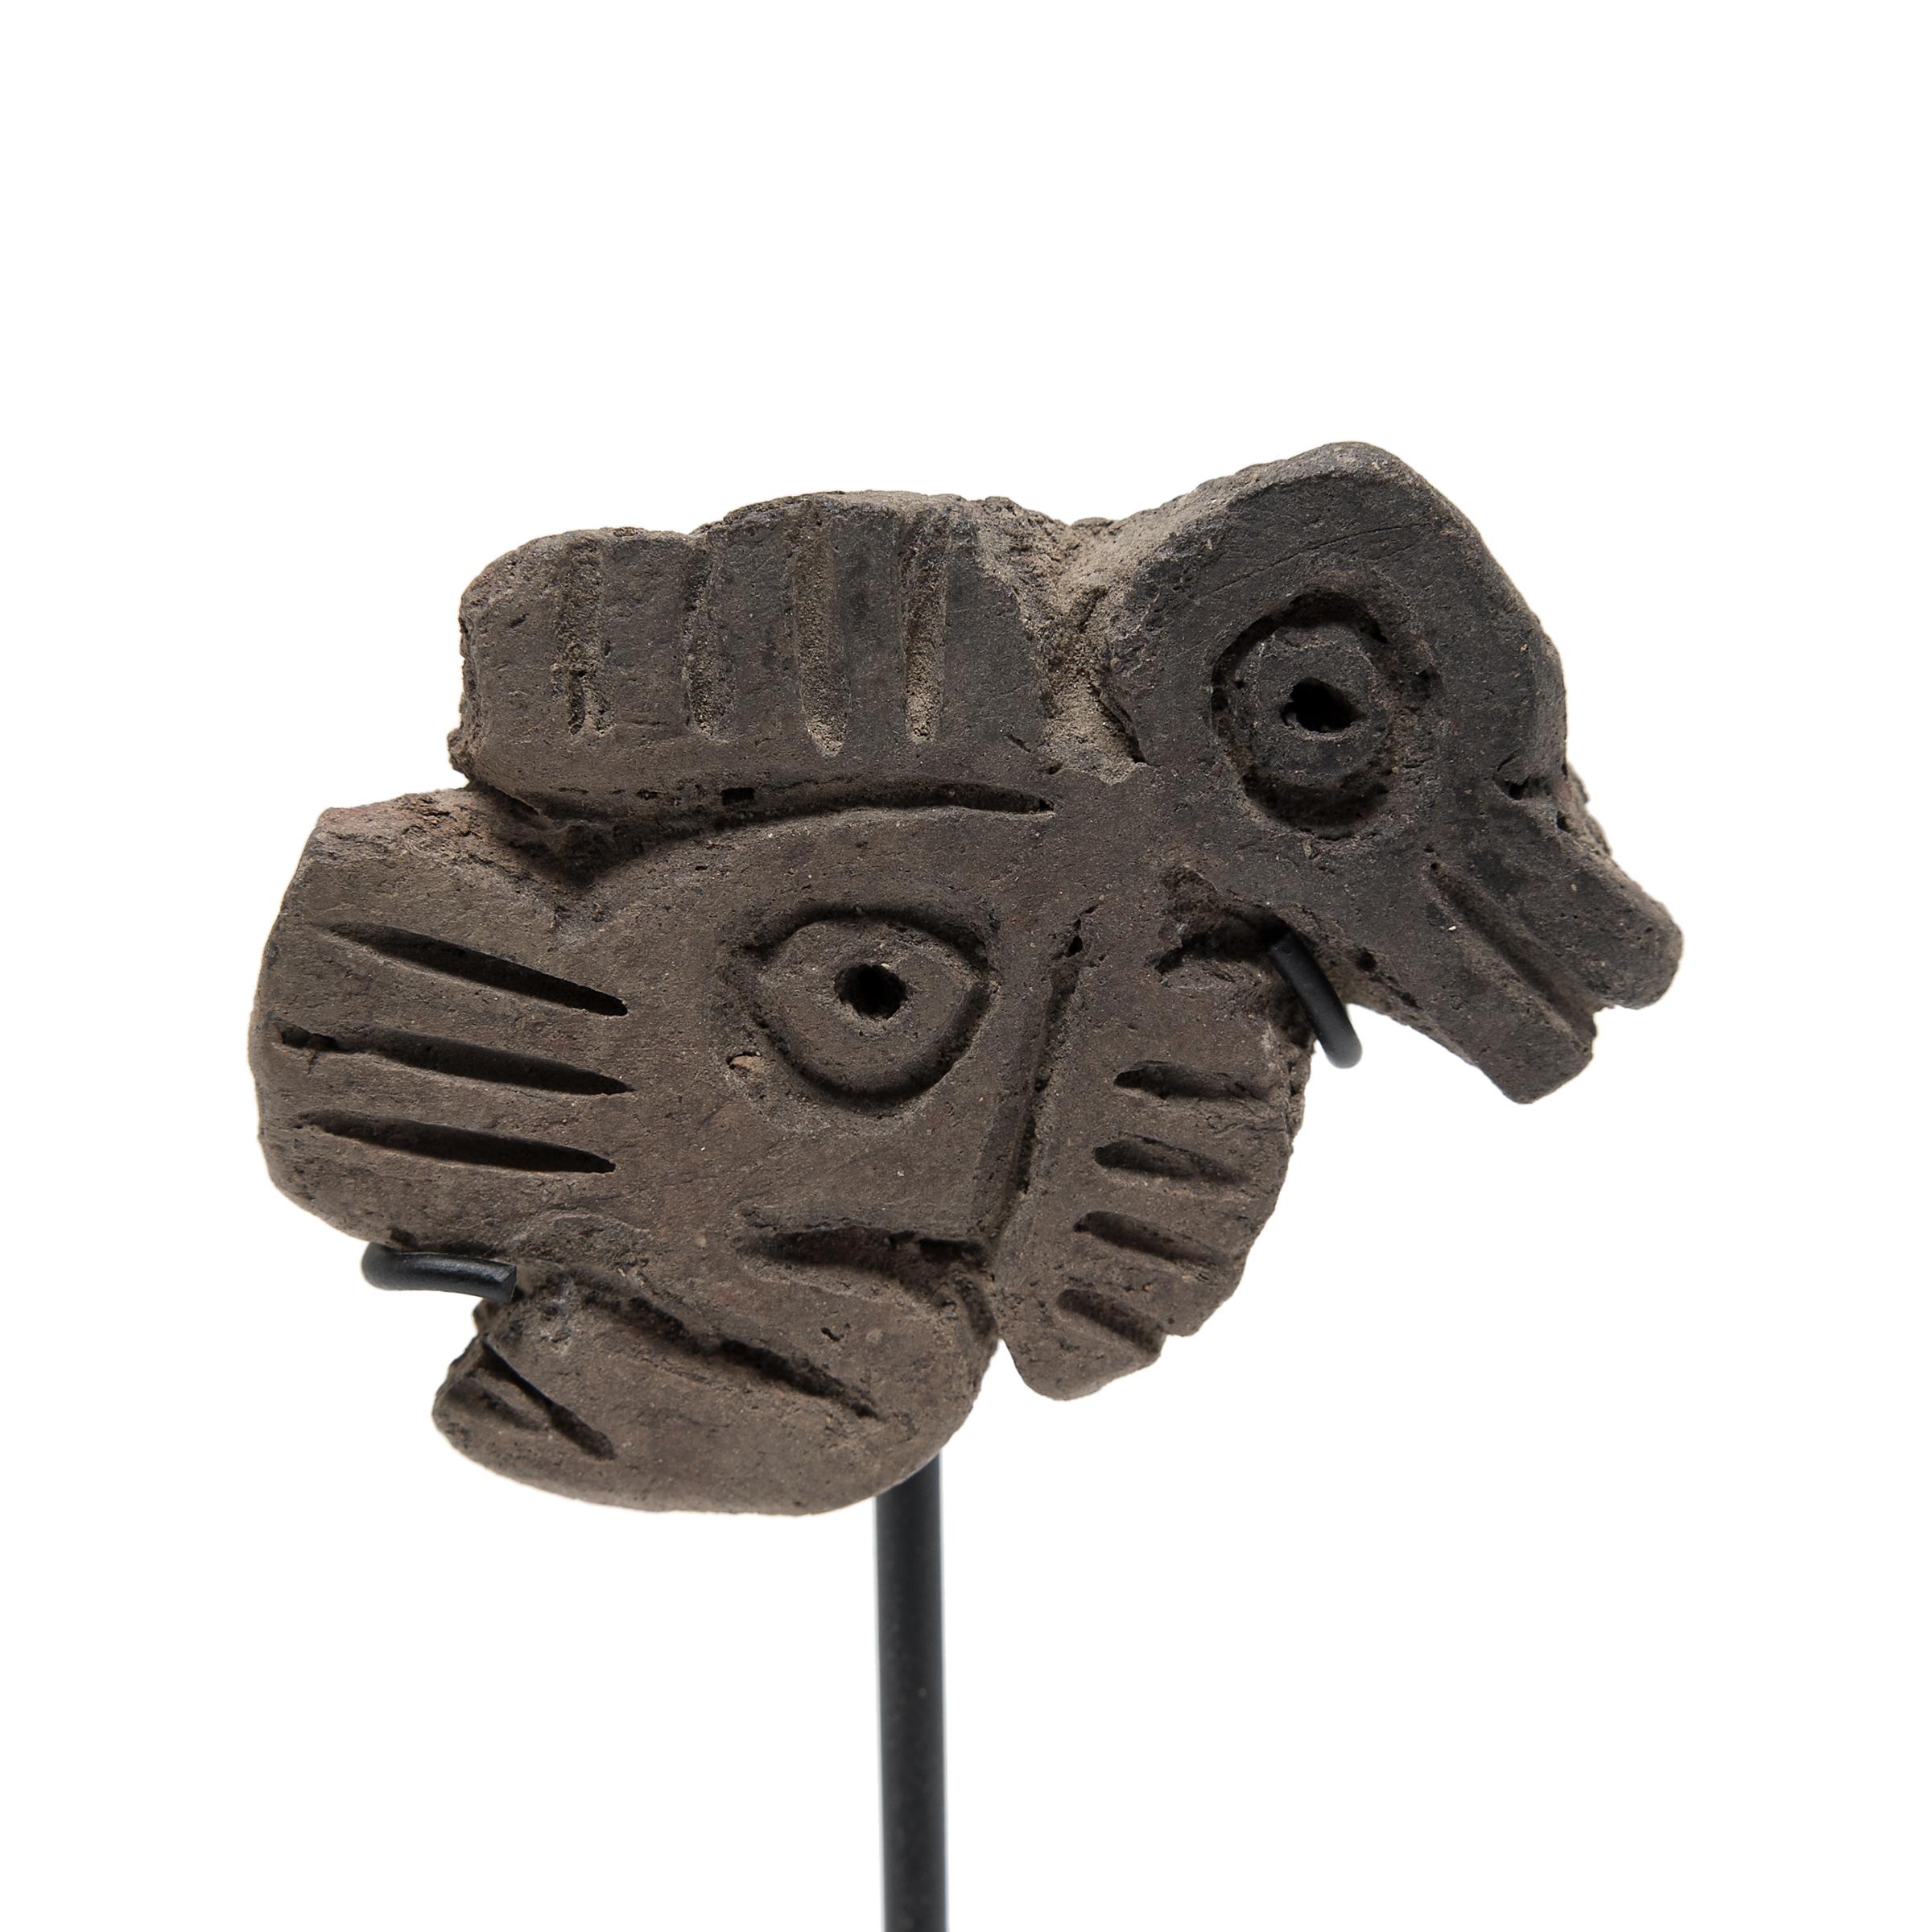 Stamps, or sellos, such as this one were common during the pre-Columbian period in Mesoamerica and most popular during the Formative Period that spanned the years between 1200-800 B.C. The primary use of sellos is unknown, but they are believed to